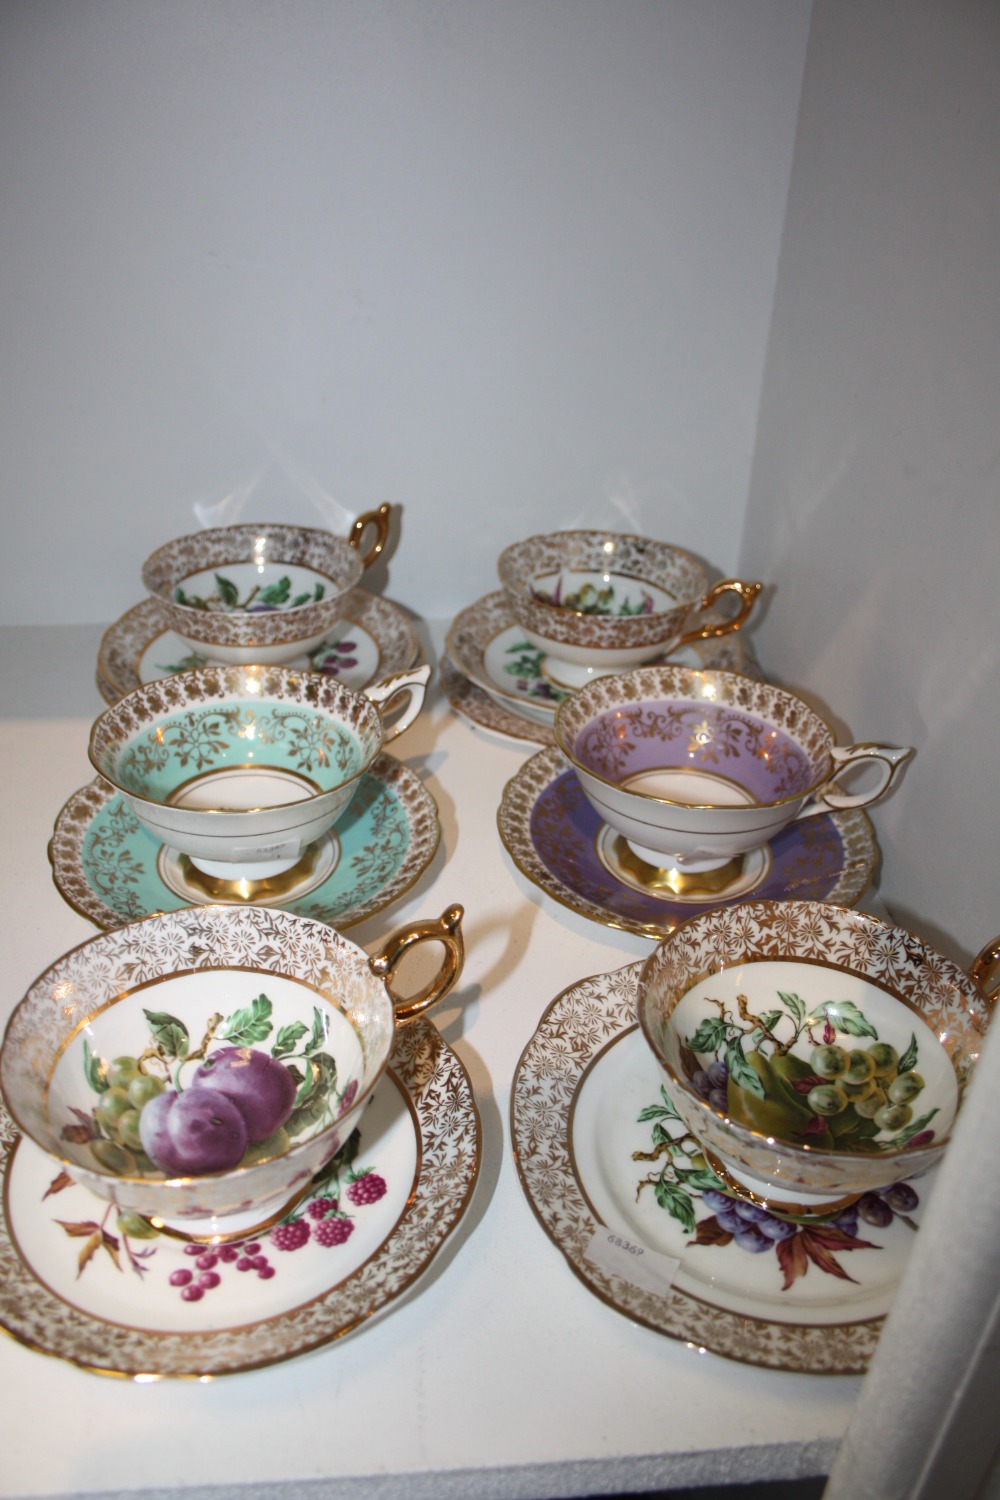 Teaware - a Royal Stafford teacup and saucer, decorated with roses and ornately gilded; another;